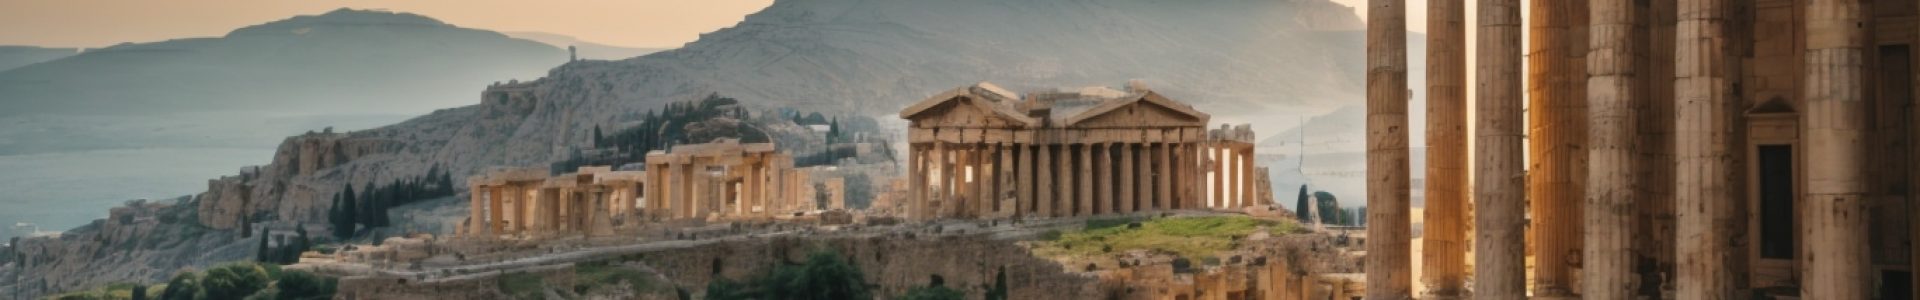 PhotoReal_Explore_the_stunning_city_of_ancient_Greece_during_t_0